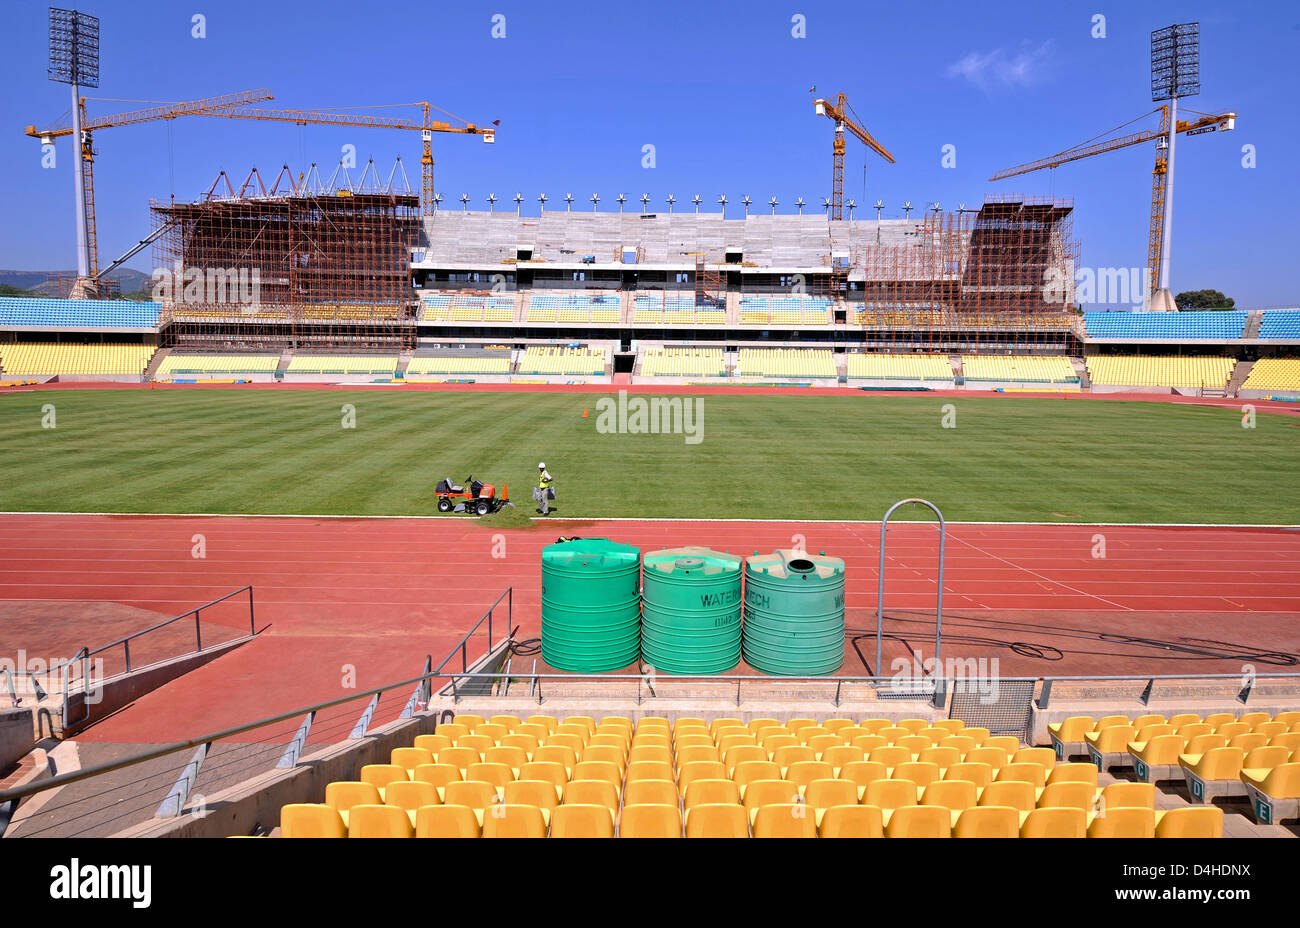 View into the construction site of the Royal Bafokeng stadium on Rustenburg, South Africa, 25 November 2008. The stadium should be a venue for both the 2009 FIFA Confederations Cup and the 2010 FIFA World Cup South Africa. Photo: Gero Breloer Stock Photo